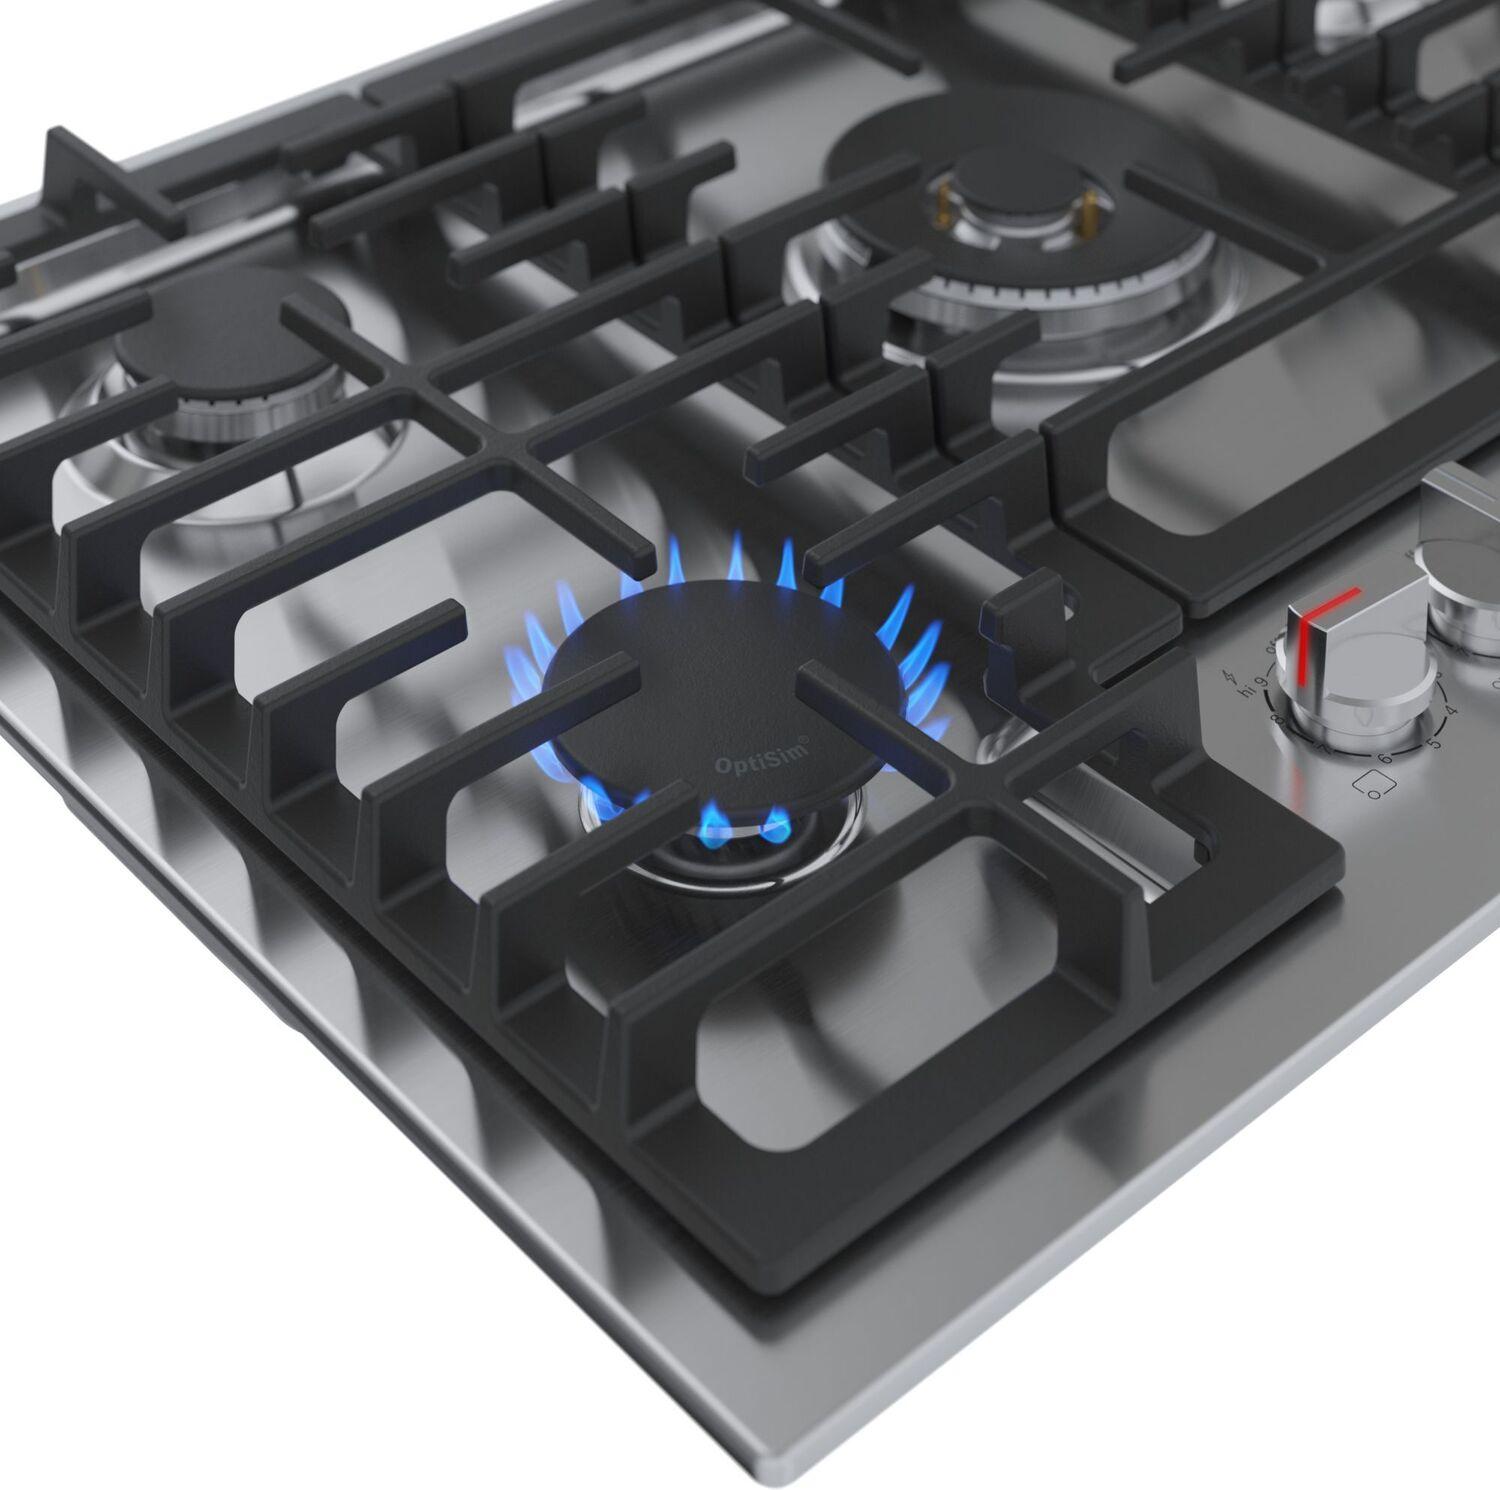 Bosch 800 Series Gas Cooktop 30" Stainless steel NGM8059UC